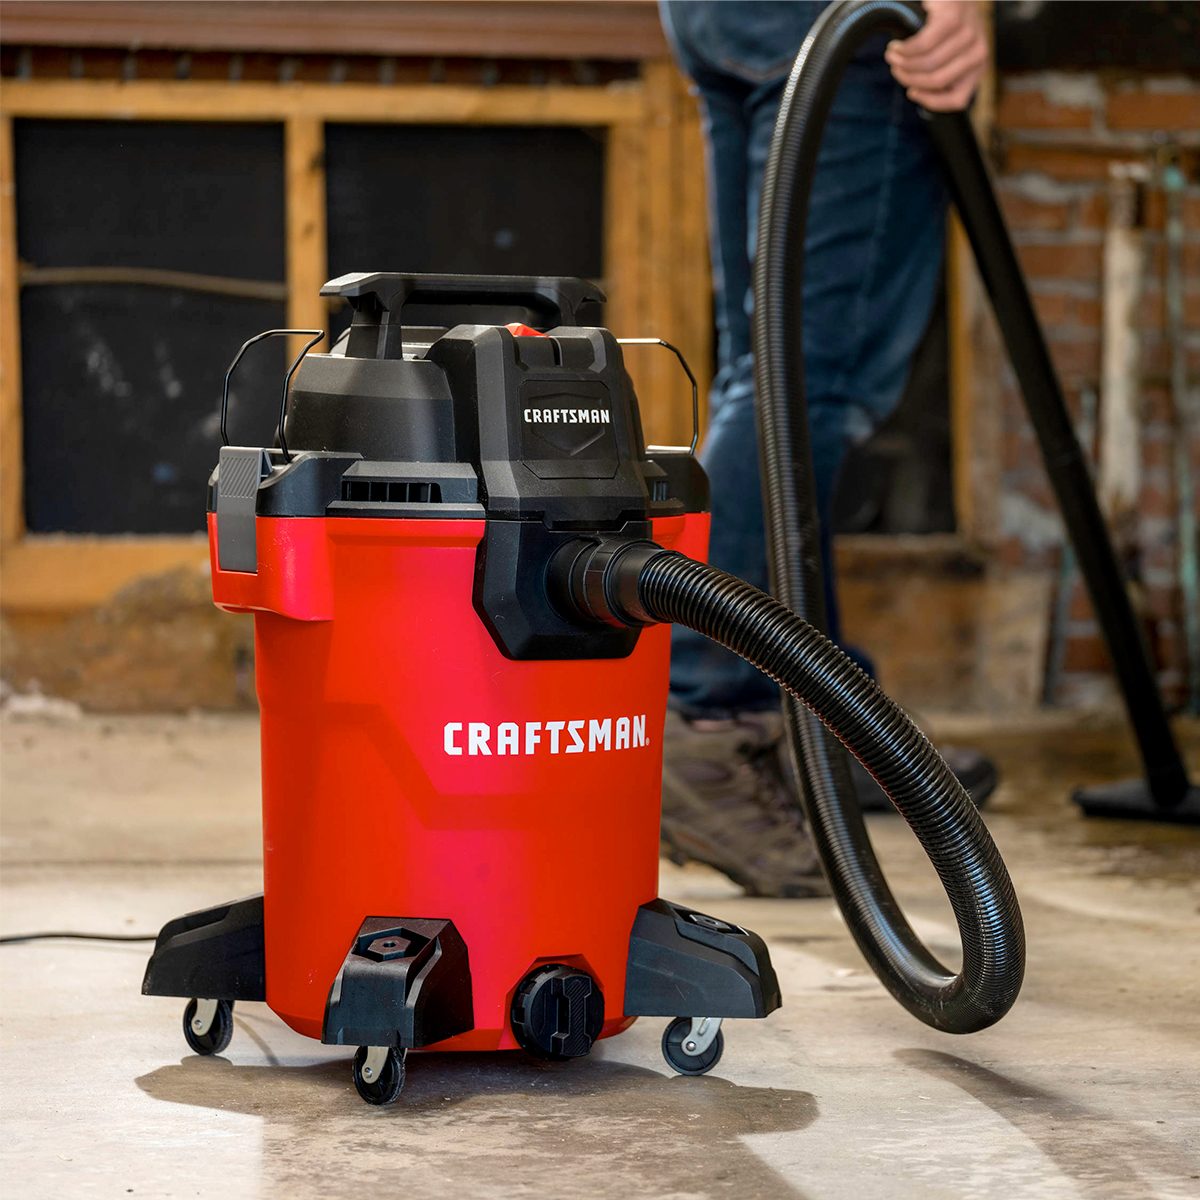 Shop-Vac Vacuum Review: Durable and Affordable Canister Vacuum